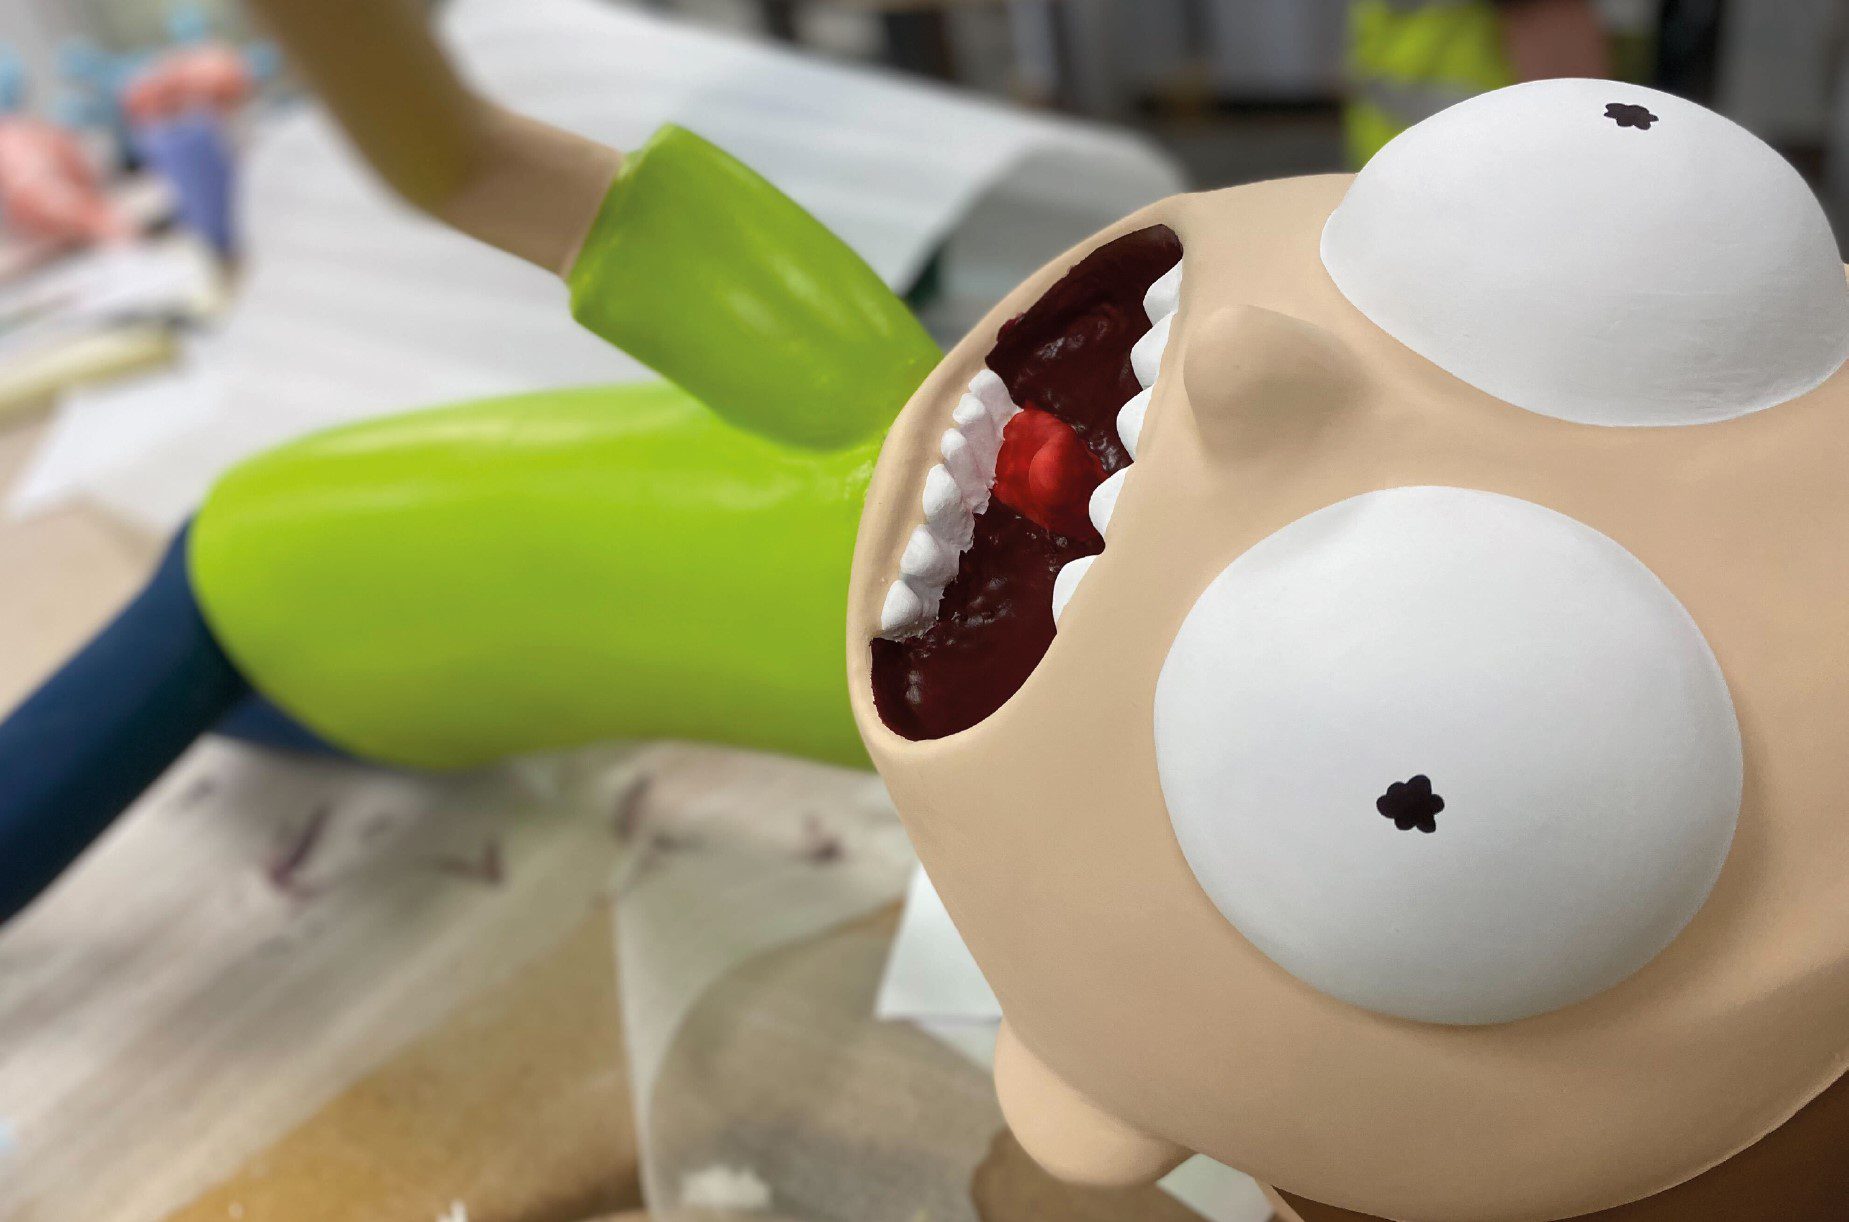 A close-up of a Morty figure that has a green t-shirt and its mouth open